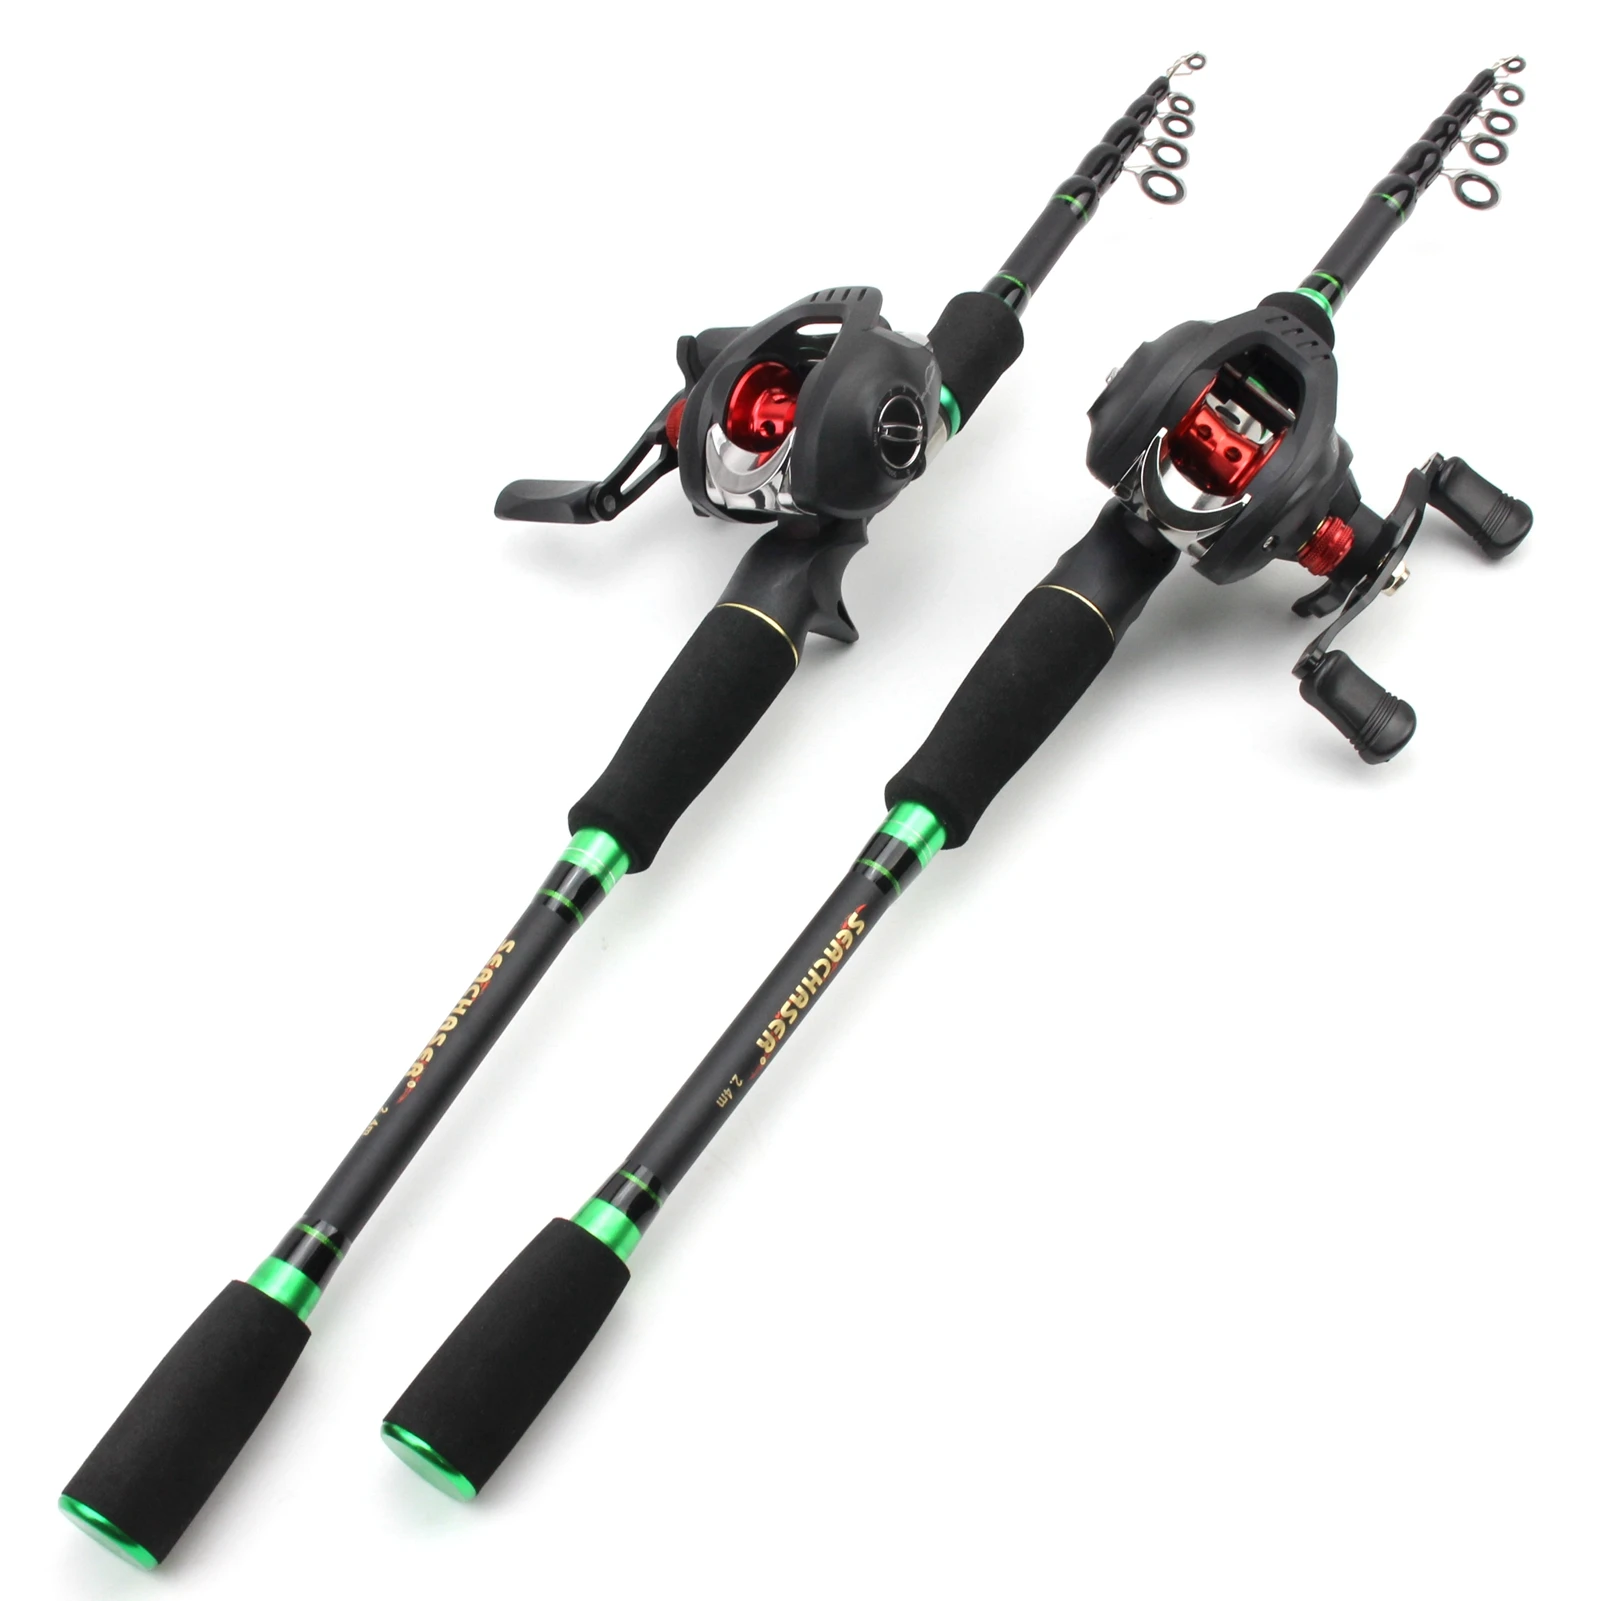 https://ae01.alicdn.com/kf/H13115fbc8b4b4f54b469cf7acc347aacl/NEW-1-8m-2-7m-Rod-Reel-Combos-Fishing-rod-with-reel-Casting-Rod-and-Casting.jpg